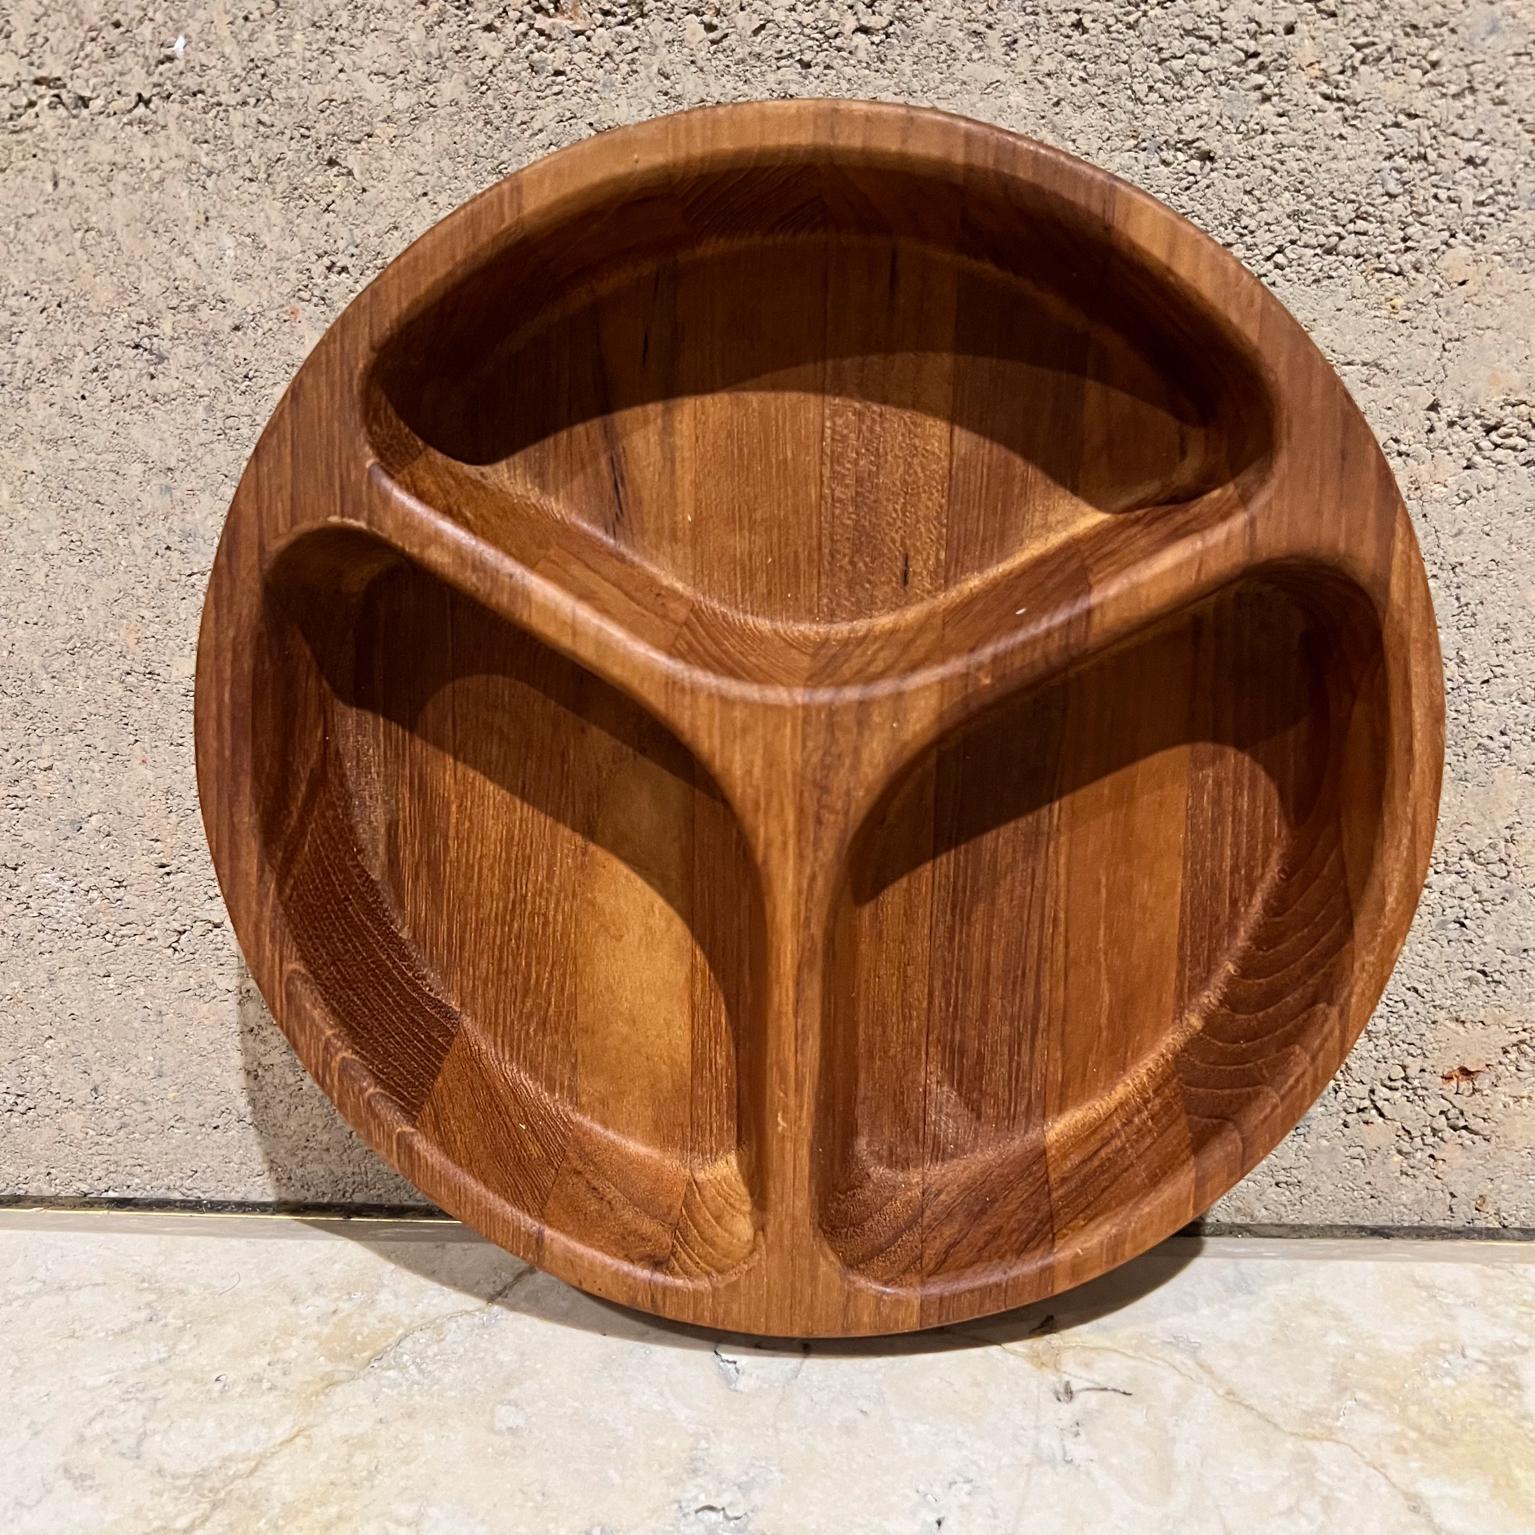 1960s Dansk International Partitioned Teak Snack Tray Malaysia In Good Condition For Sale In Chula Vista, CA